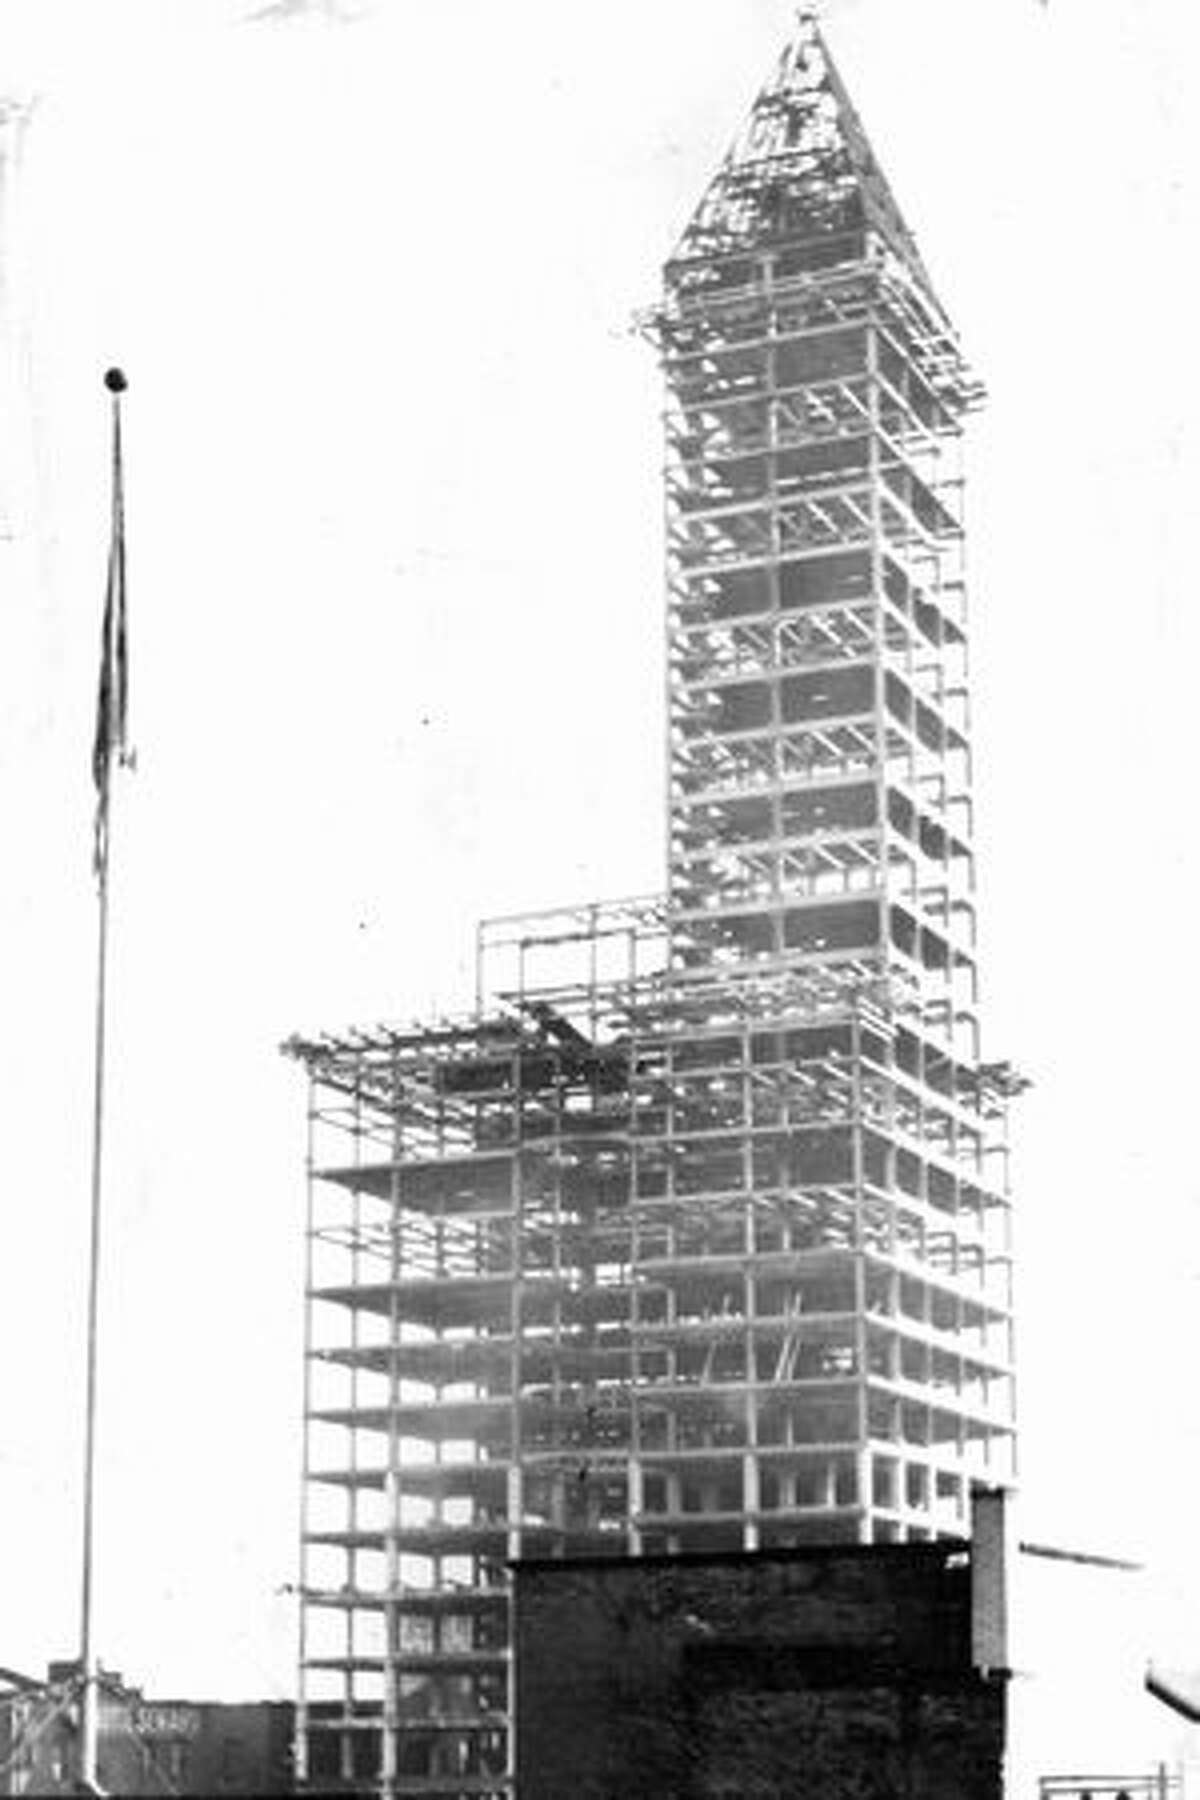 The Smith Tower under construction. Exact date unknown.